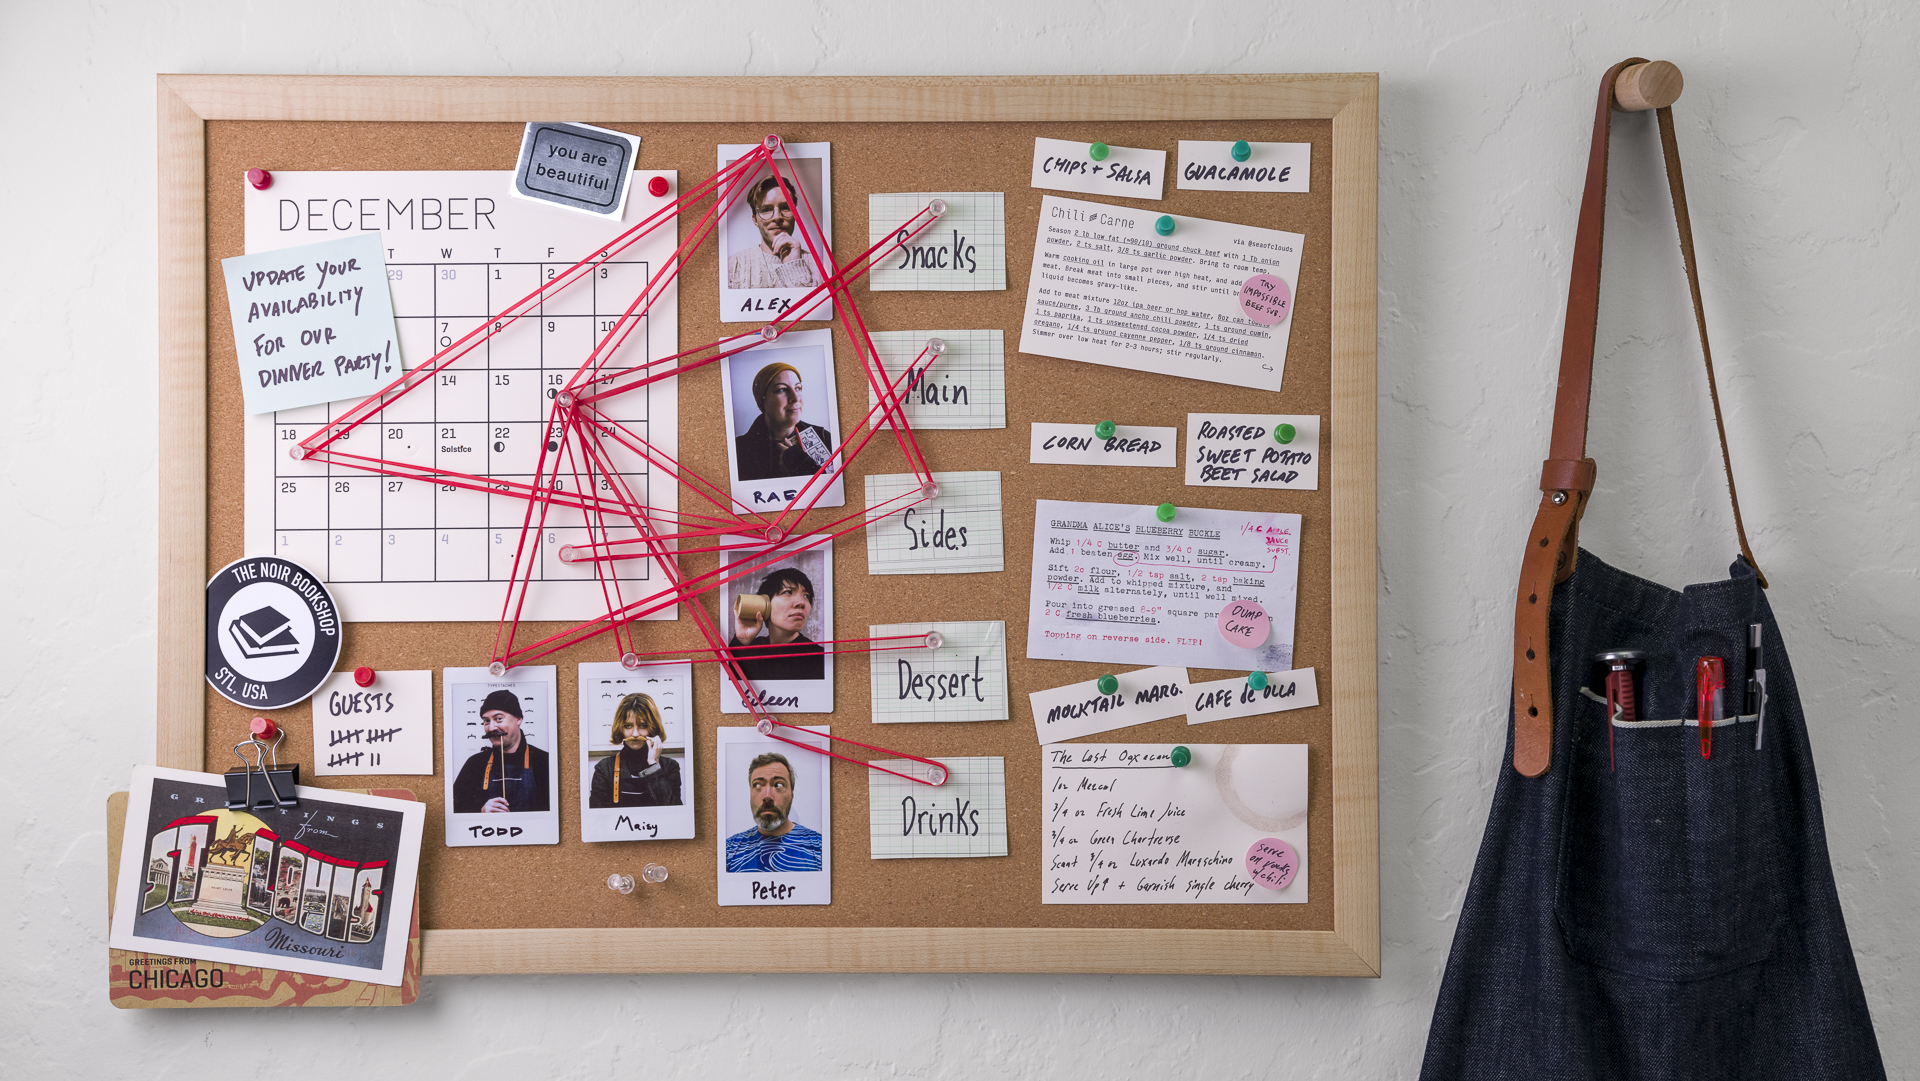 A shared pinboard becomes a collaborative modeling tool to plan a dinner party.